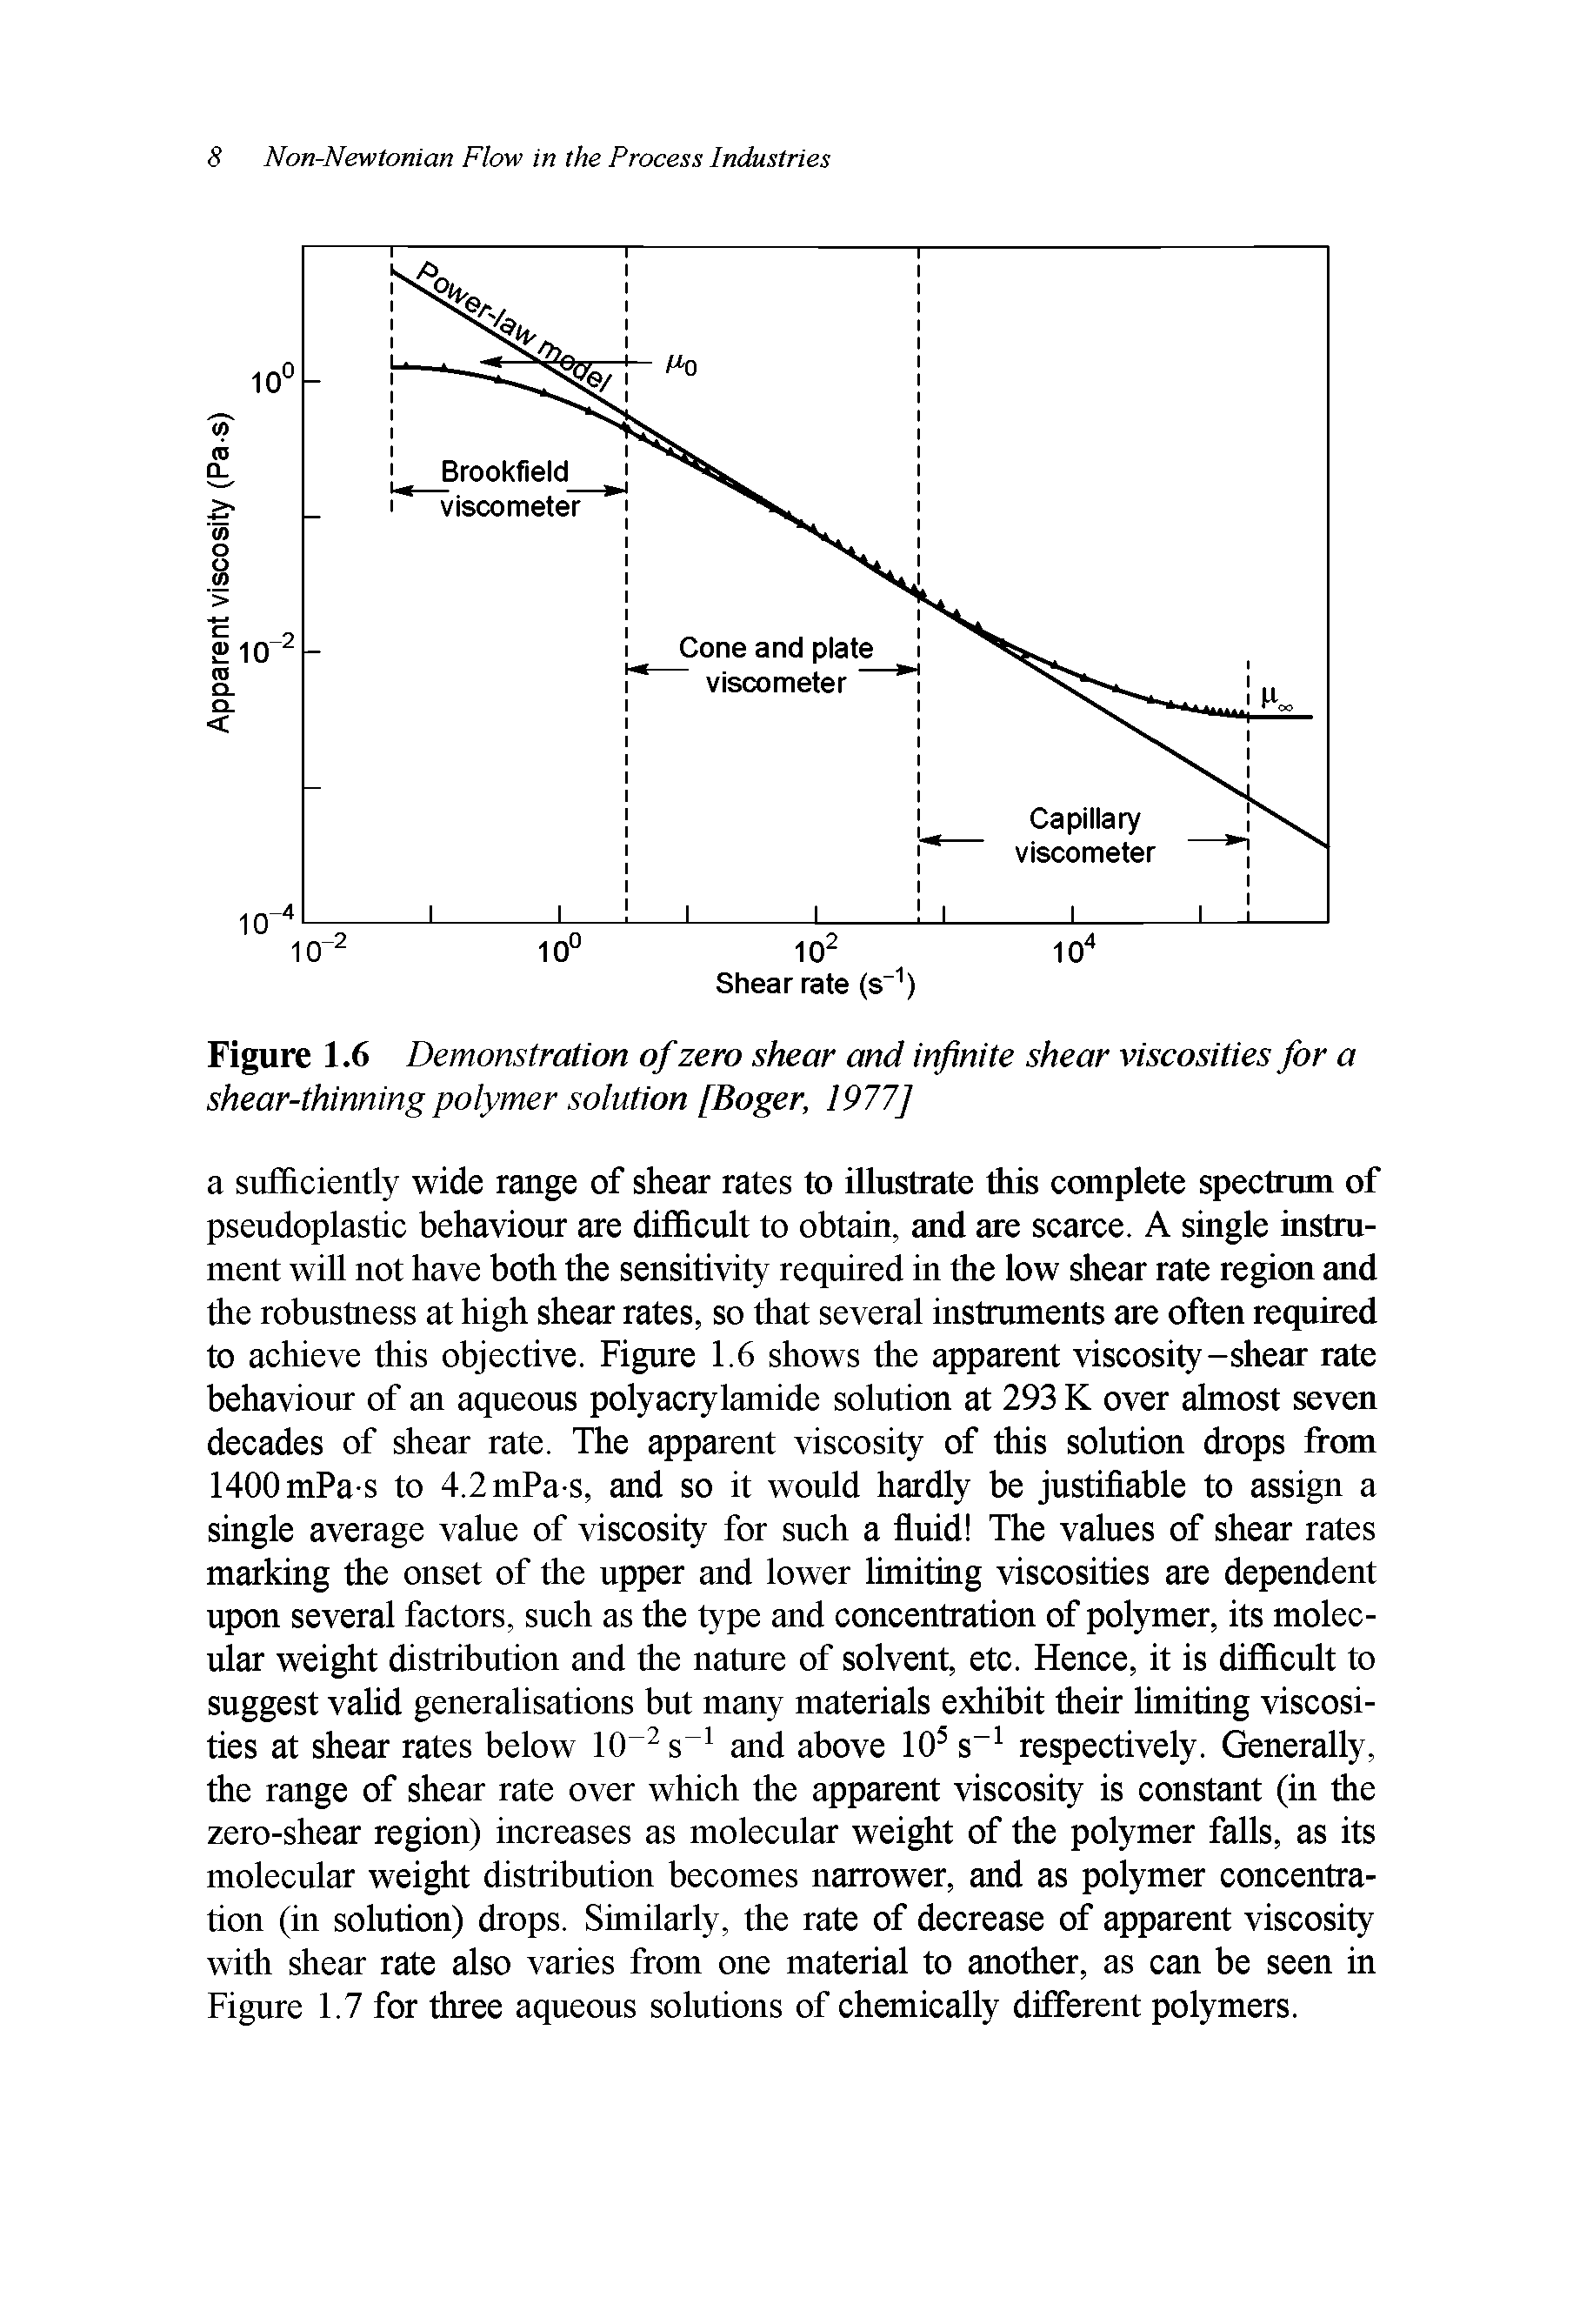 Figure 1.6 Demonstration of zero shear and infinite shear viscosities for a shear-thinning polymer solution [Roger, 1977]...